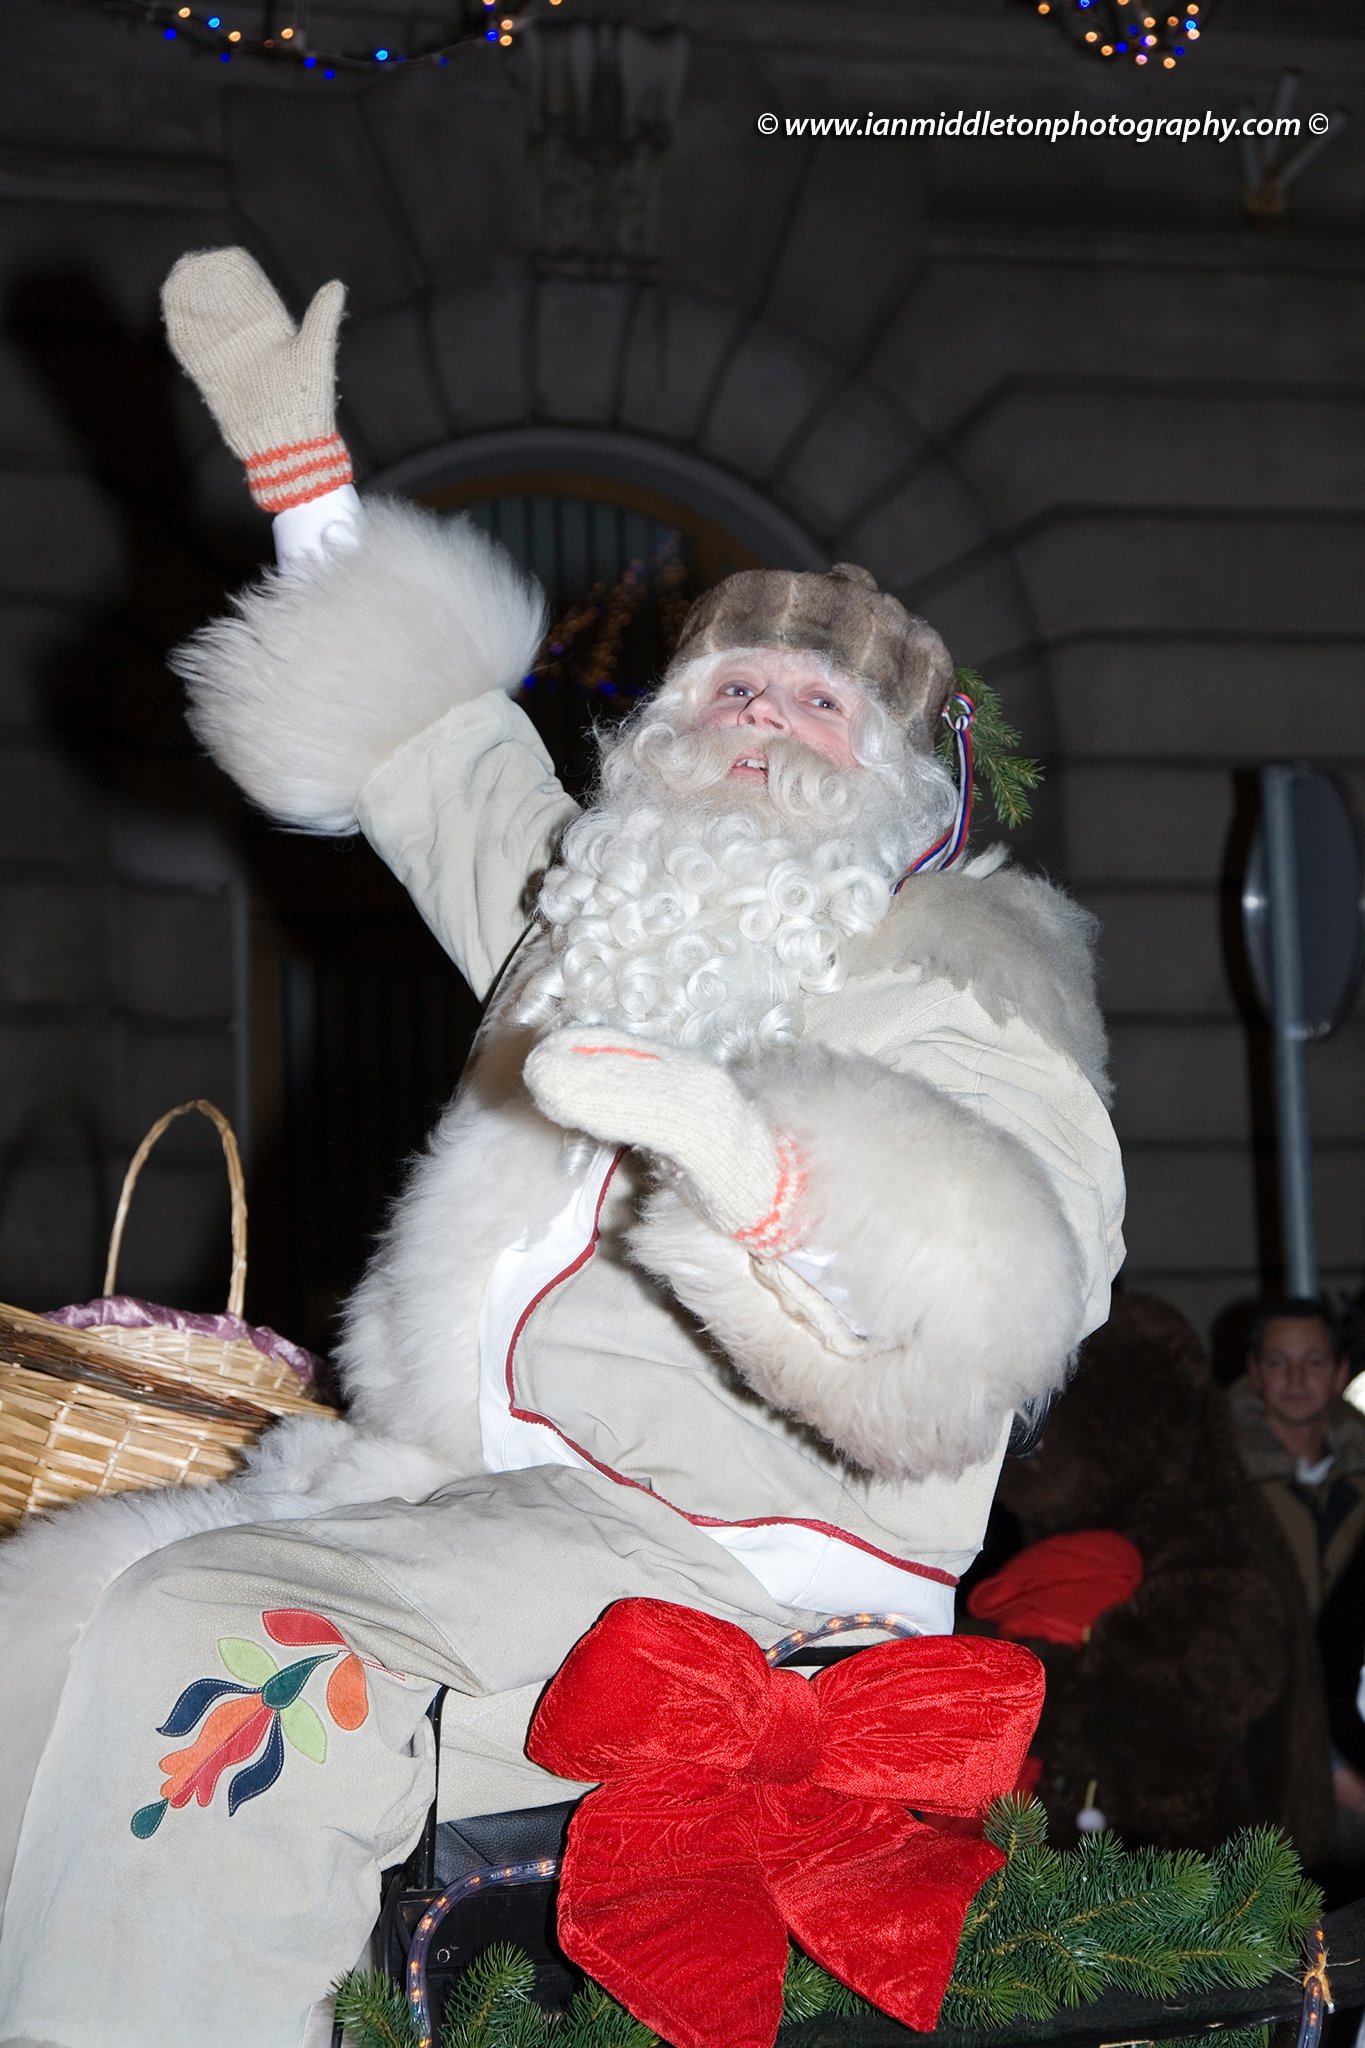 Dedek Mraz procession in Ljubljana, Slovenia. Also known as Grandfather Cold or Grandfather Frost, this tradition was used by the communists as a replacement for the western Santa Claus. The tradition comes from a ancient Russian Legend of Ded Moroz, and he wears a white outfit and Russian Kuchma Hat.